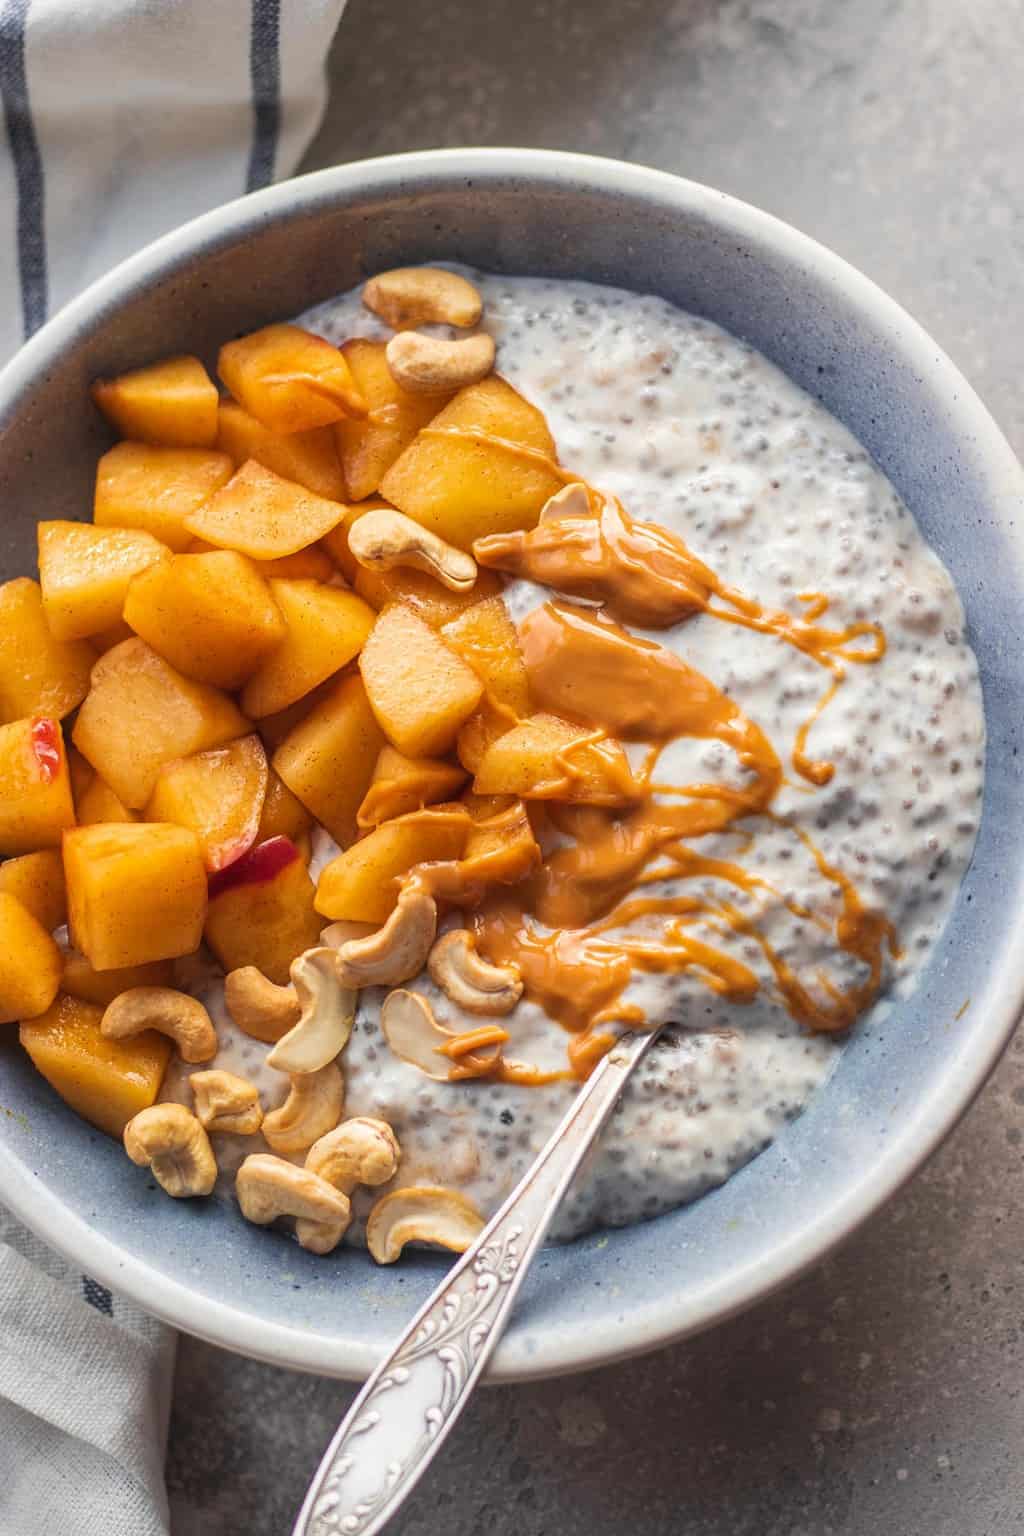 Vegan coconut chia pudding with apples and peanut butter